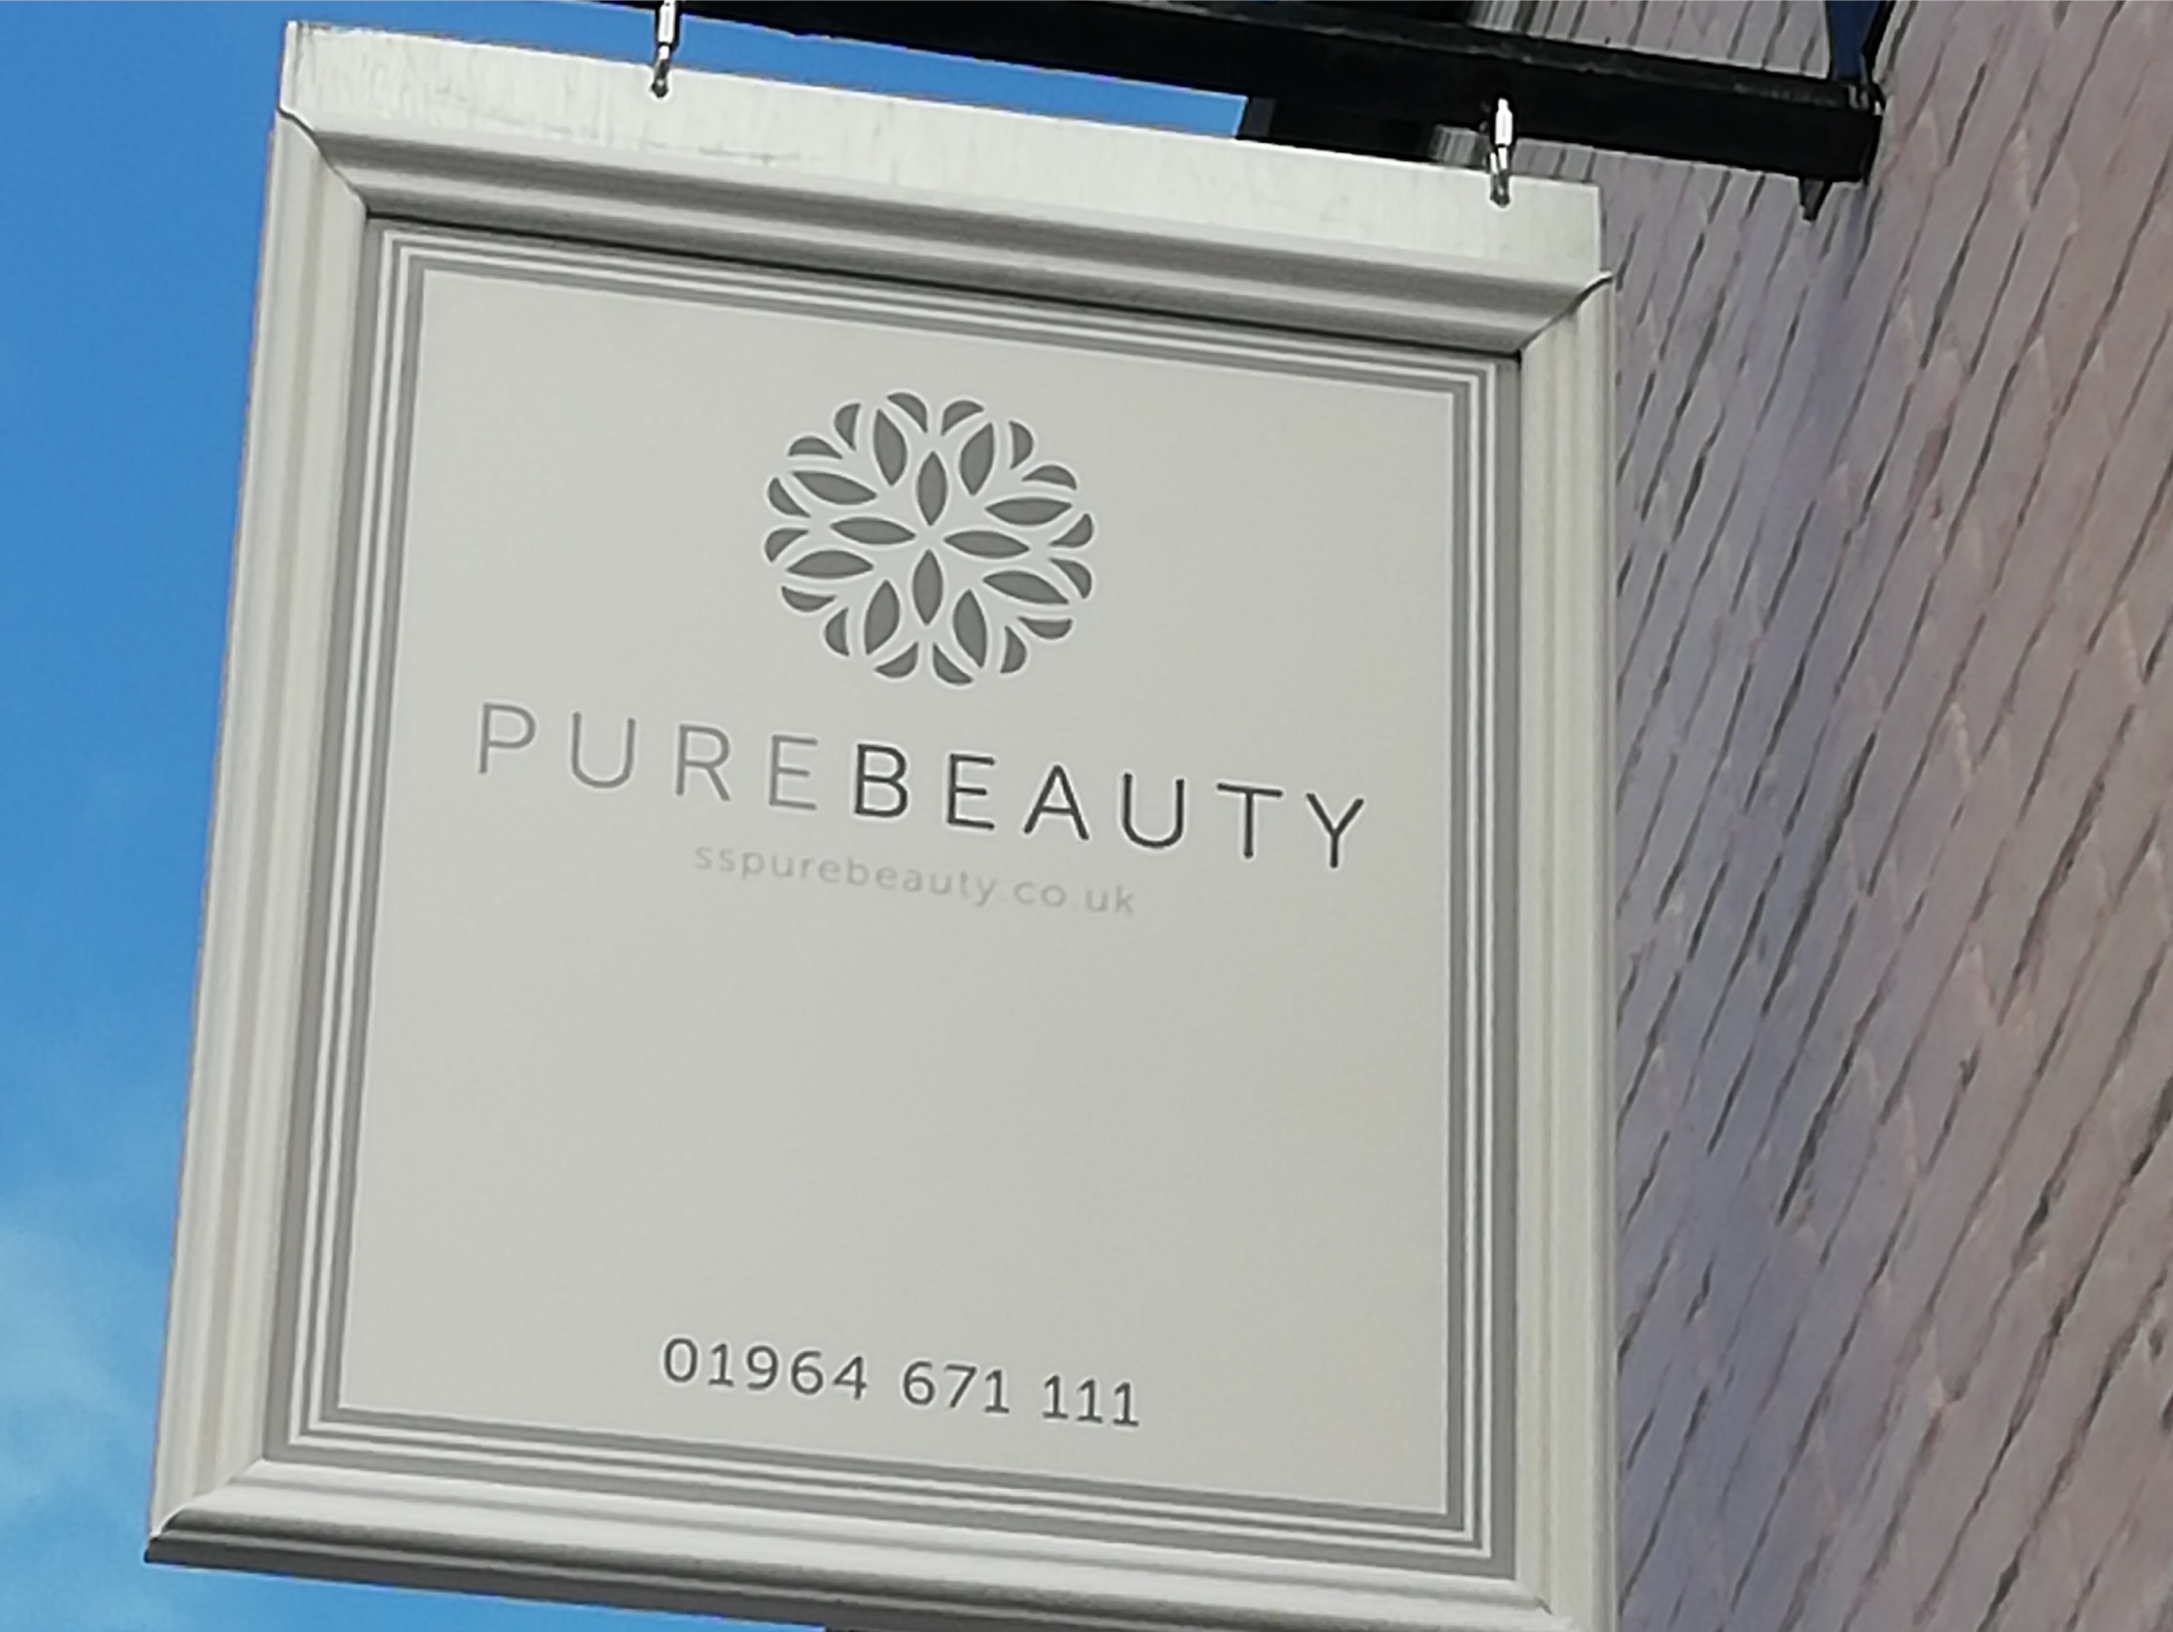 Pure Beauty Projection Signage by Business 101 in Hull